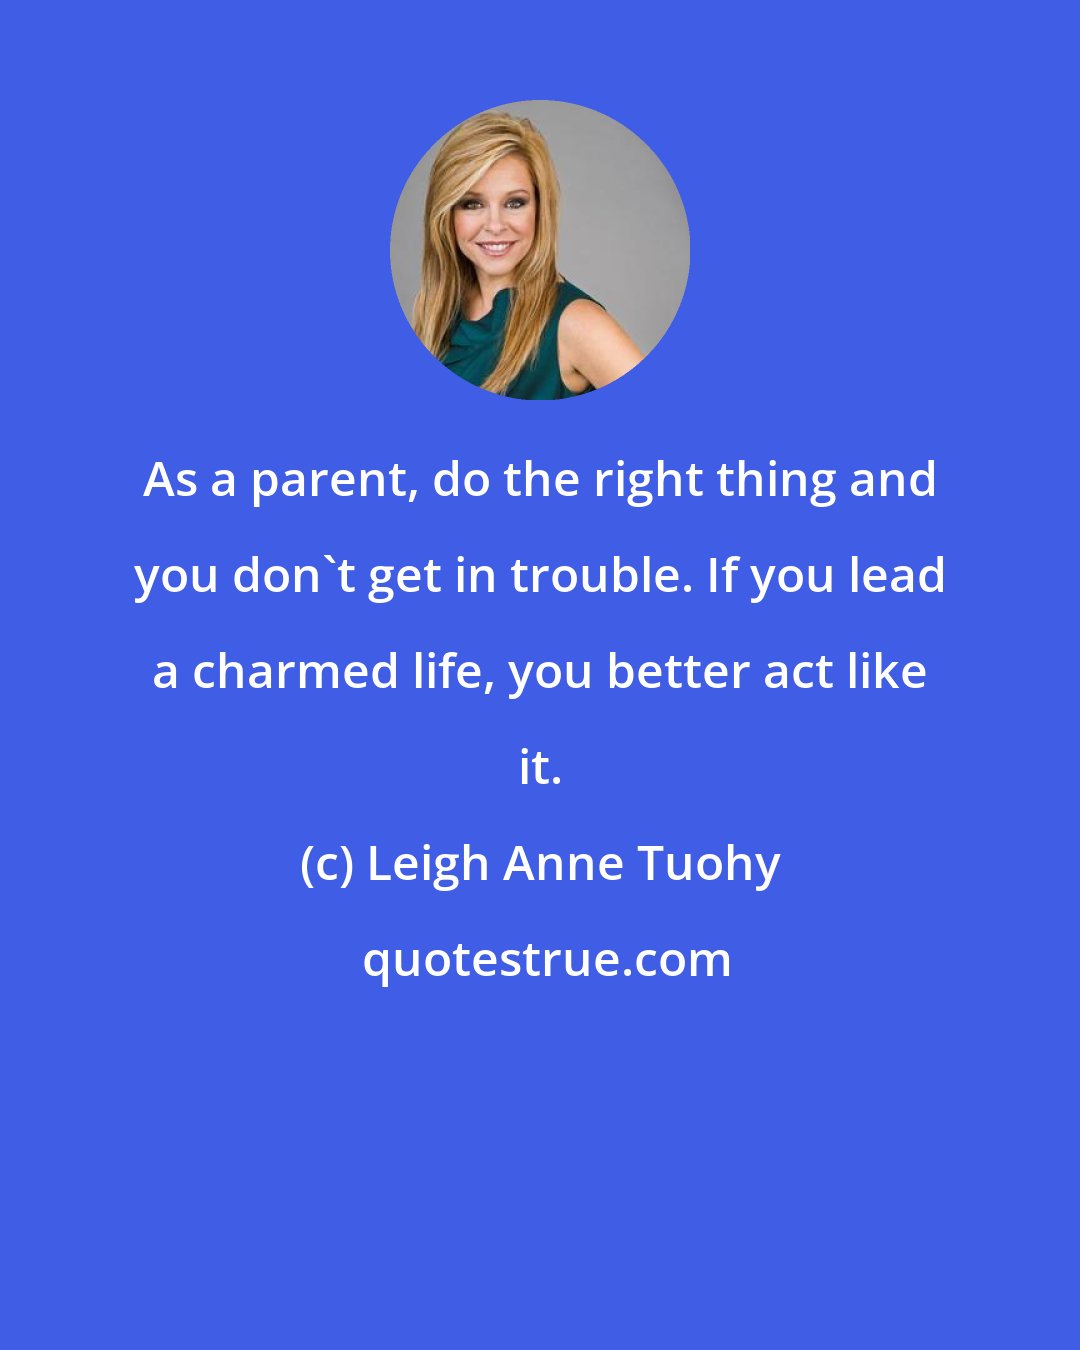 Leigh Anne Tuohy: As a parent, do the right thing and you don't get in trouble. If you lead a charmed life, you better act like it.